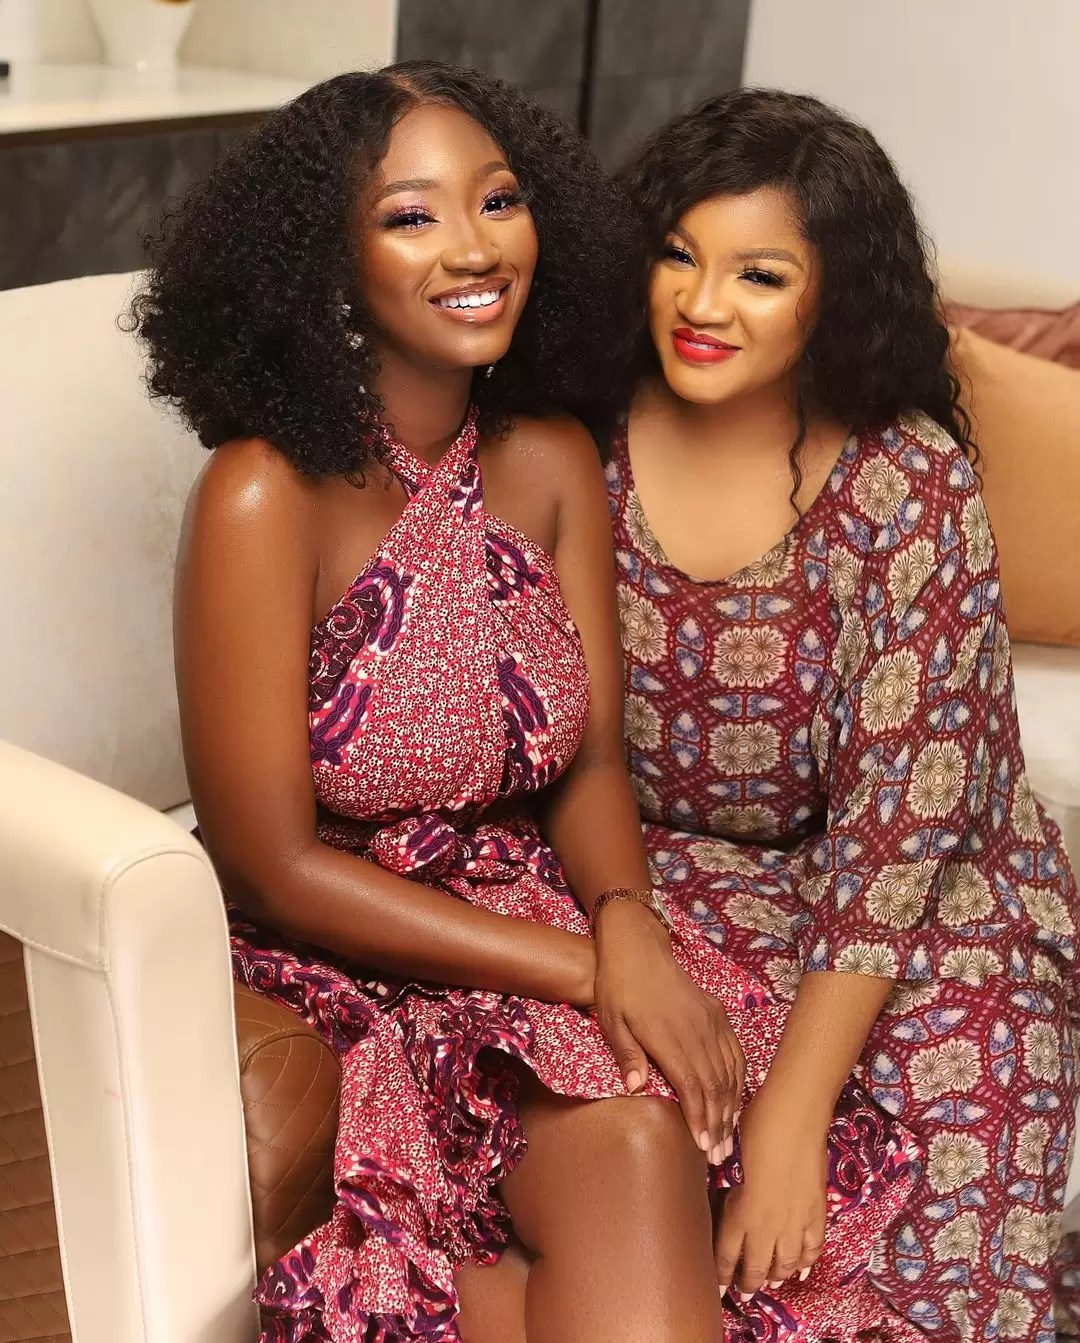 These Images Of Omotola Jalade-Ekeinde And Her Daughter, Meraiah Are Stunning • Exquisite Magazine - Fashion, Beauty And Lifestyle